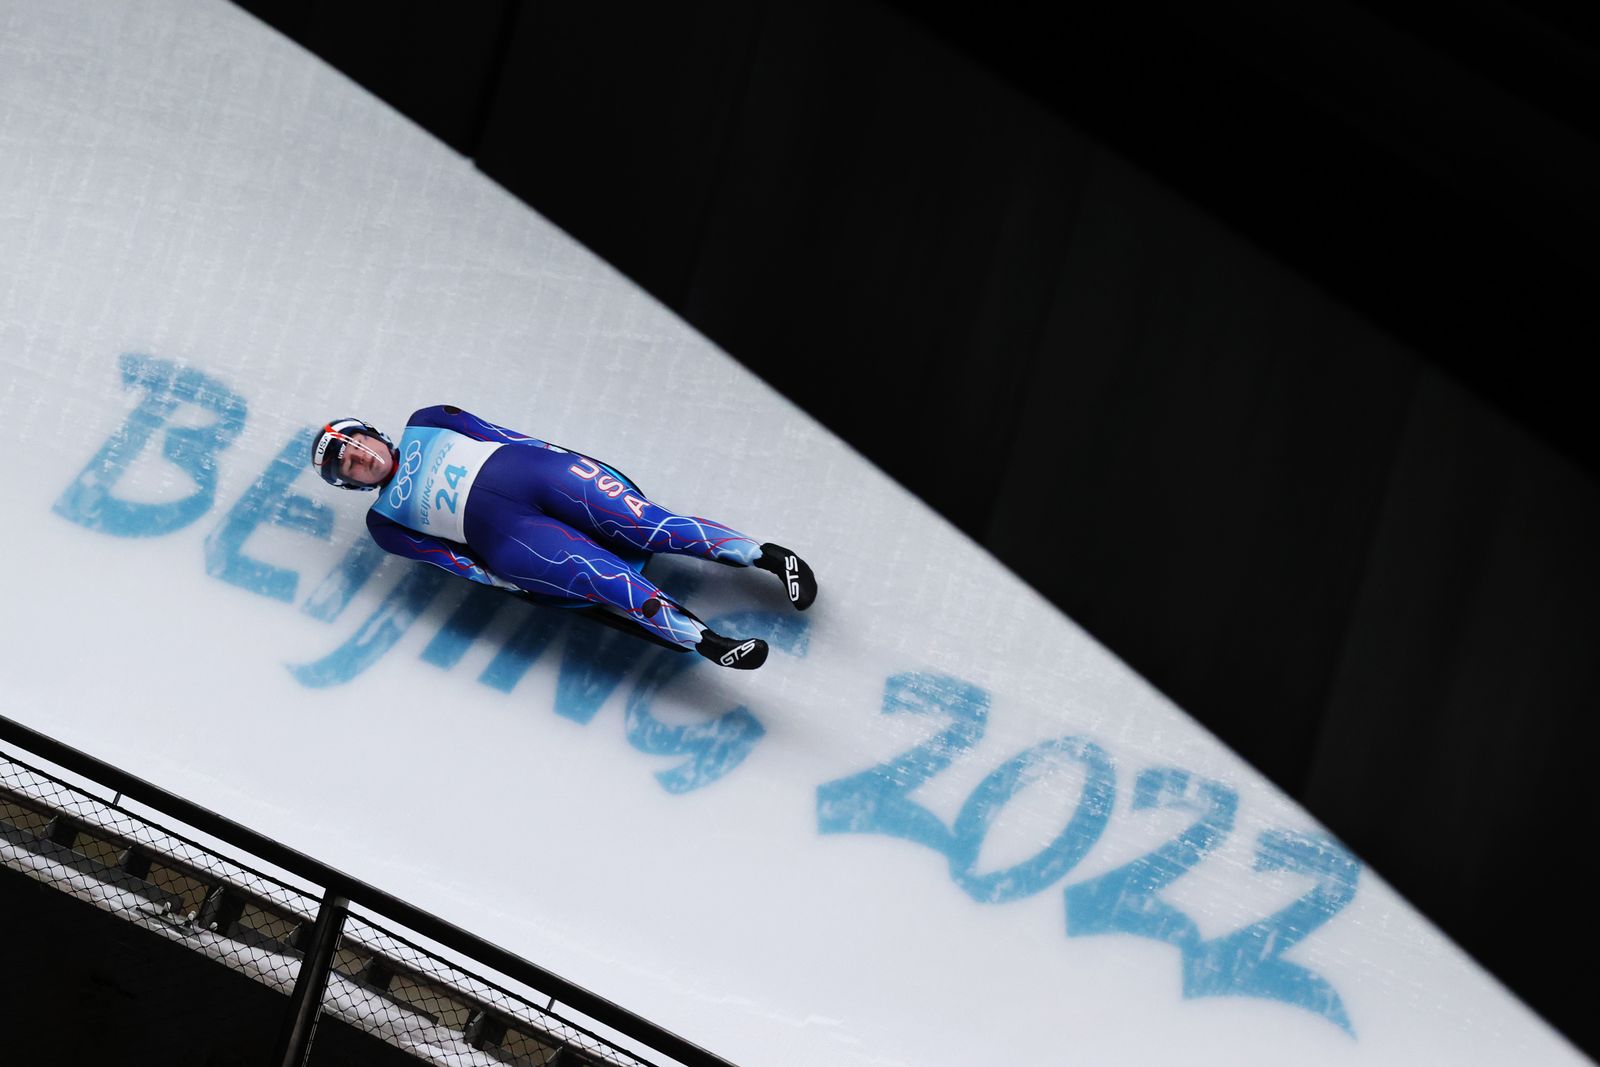 The HighSpeed Physics of Olympic Bobsled, Luge and Skeleton